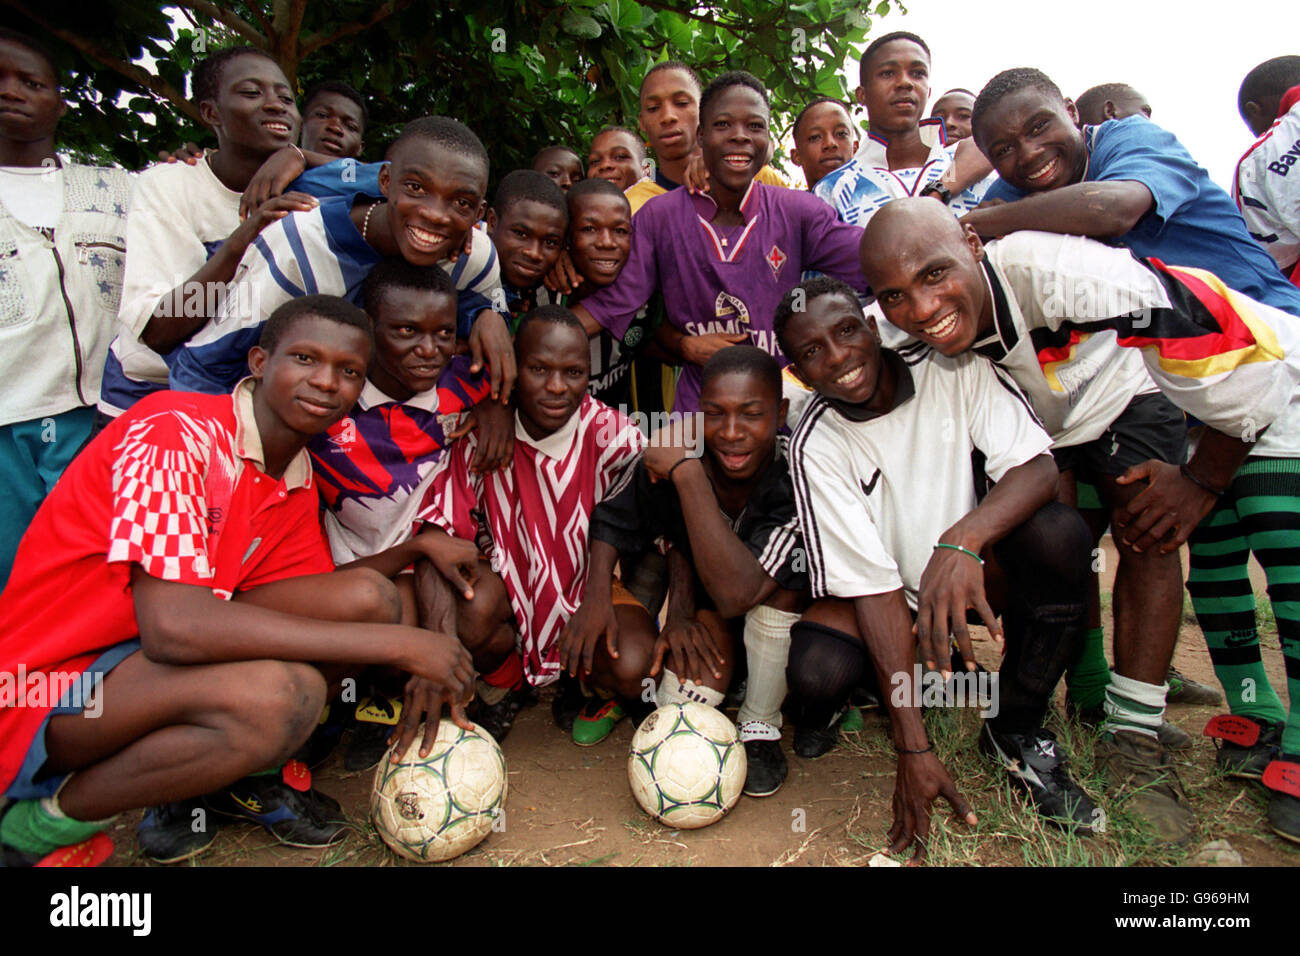 Nigerian soccer players at the Taribo West Academy in Tamuno, who receive kit and boots from Inter Milan's Taribo West Stock Photo